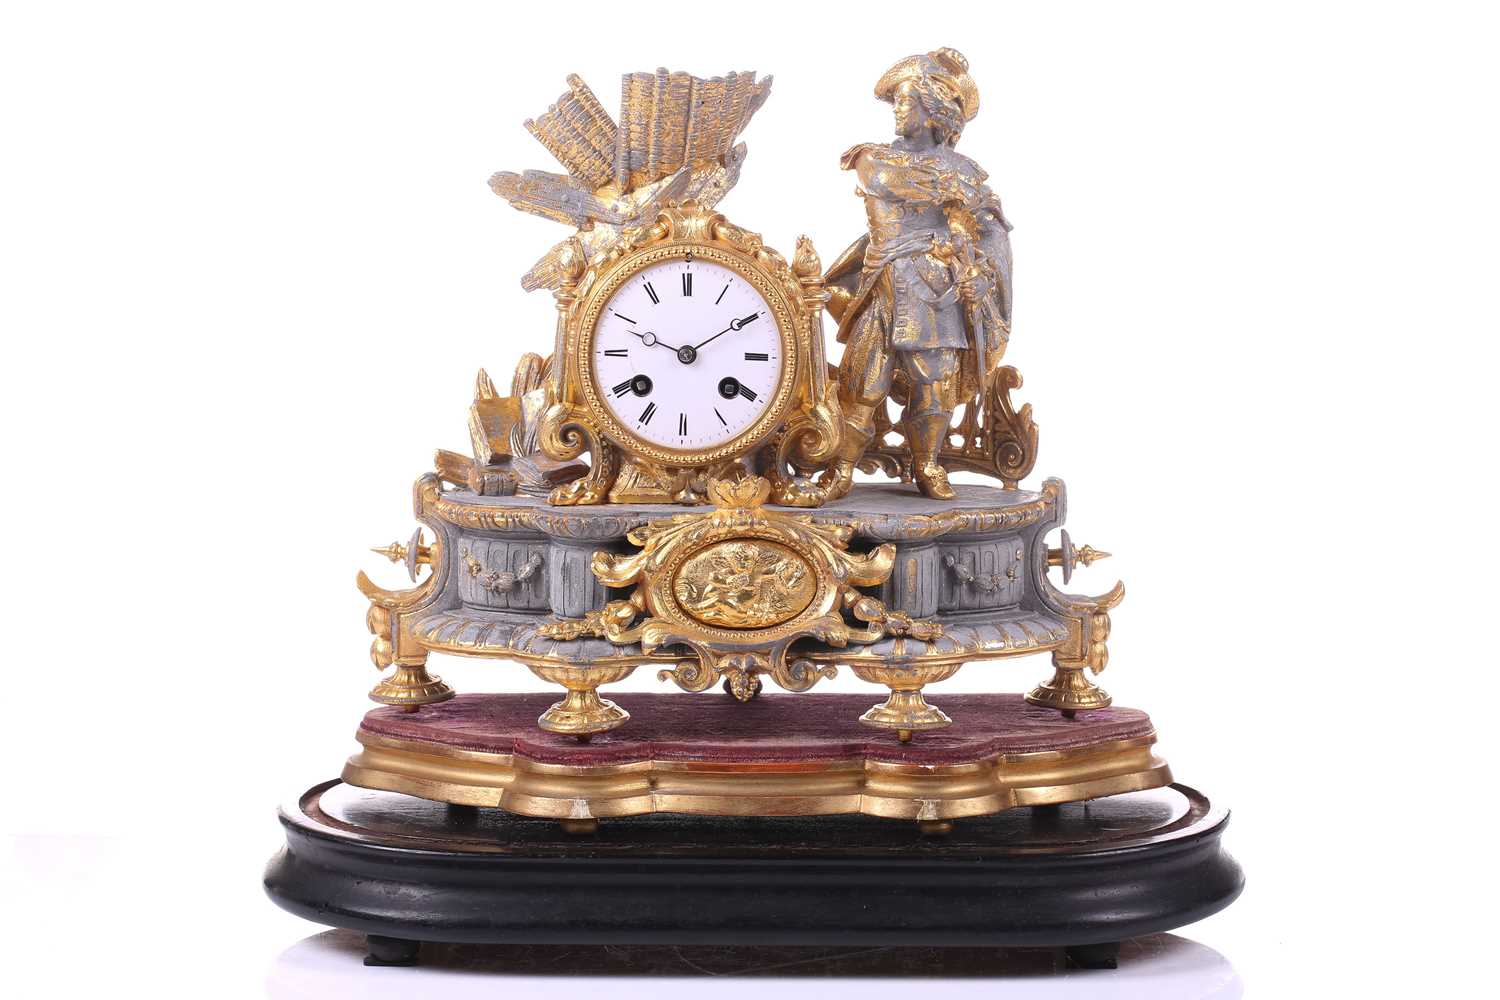 A late 19th century French parcel gilt spelter clock, depicting a nobleman standing beside a drum - Image 2 of 14